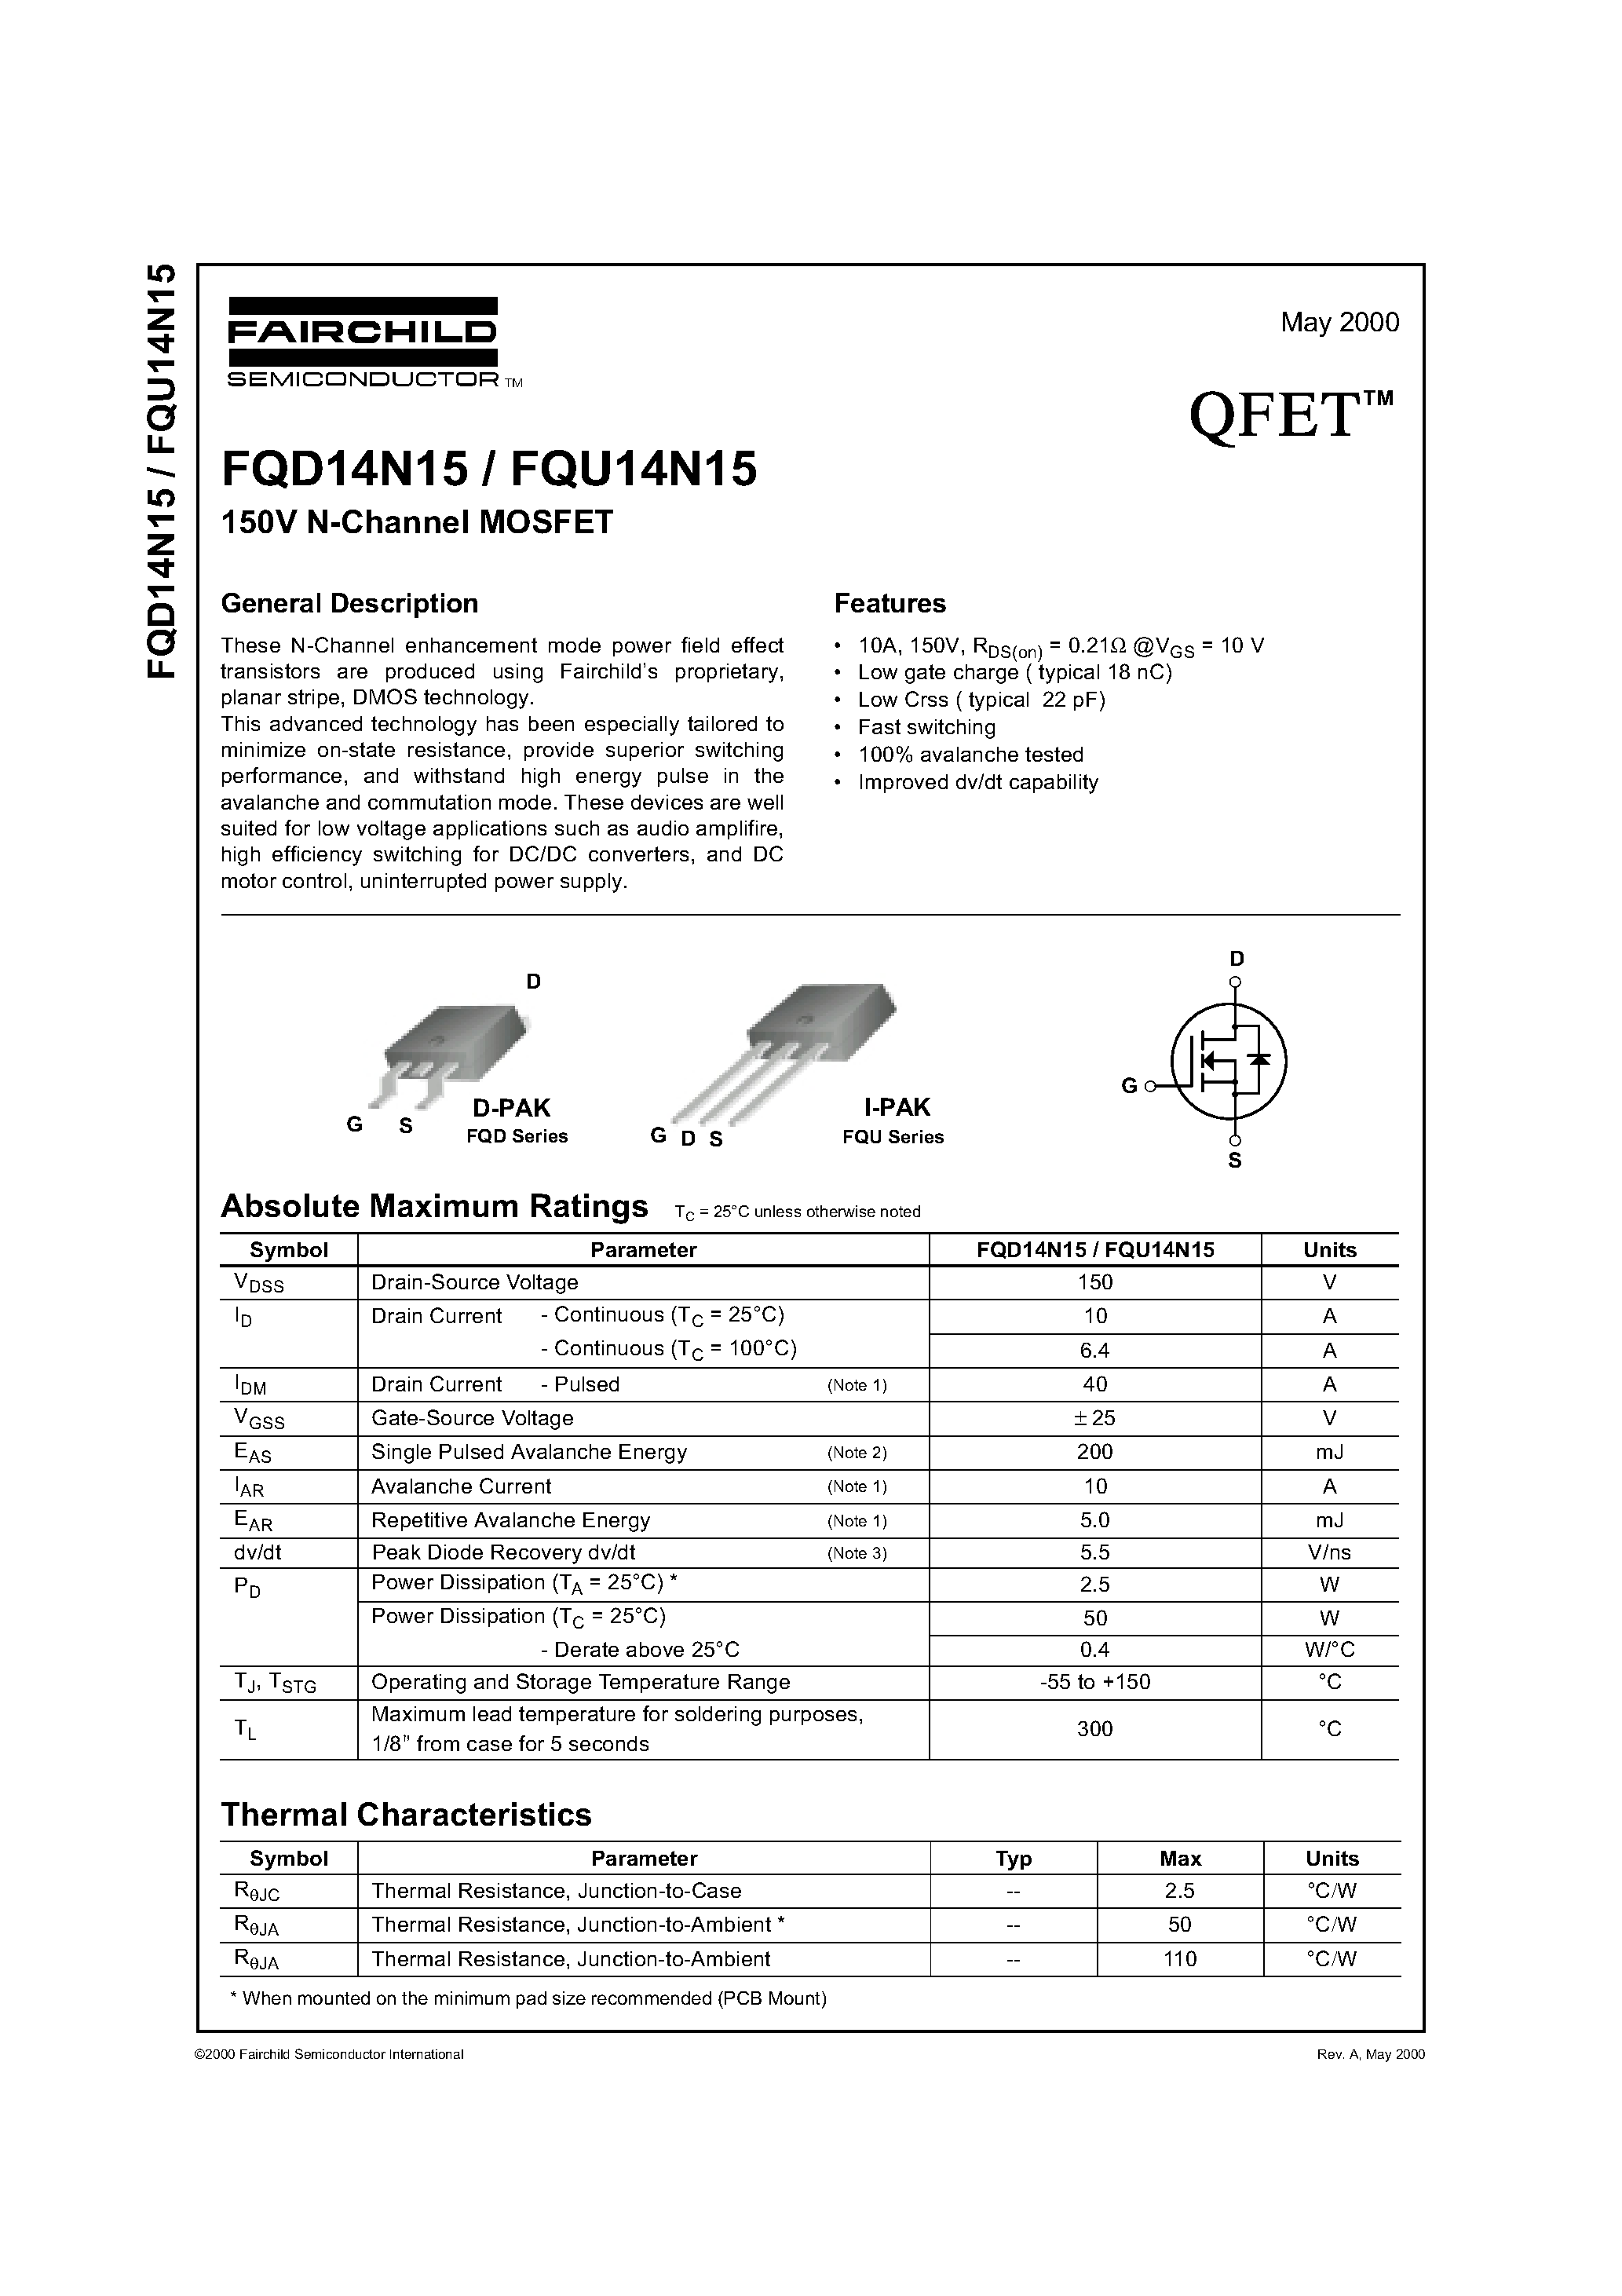 Datasheet FQD14N15 - 150V N-Channel MOSFET page 1